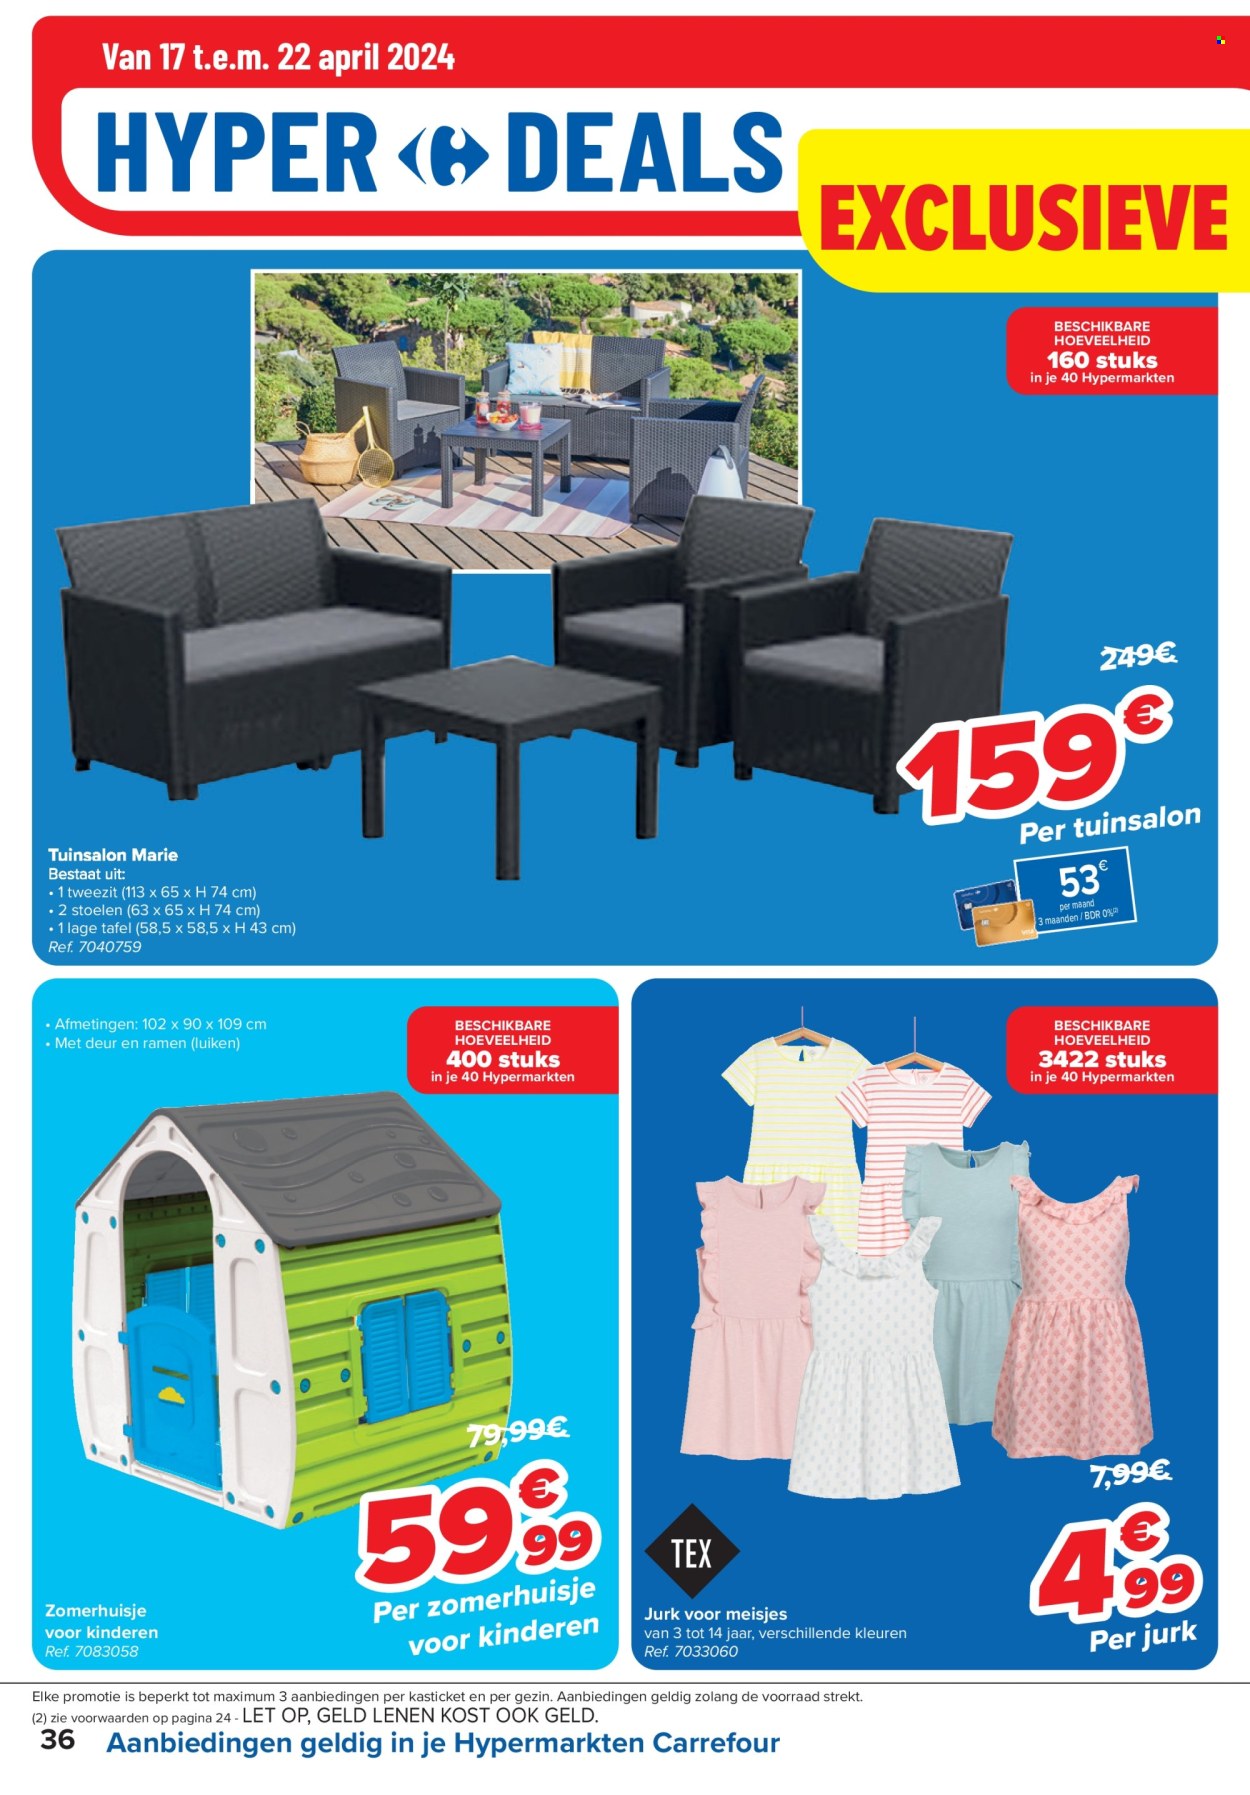 Catalogue Carrefour hypermarkt - 17.4.2024 - 29.4.2024. Page 36.